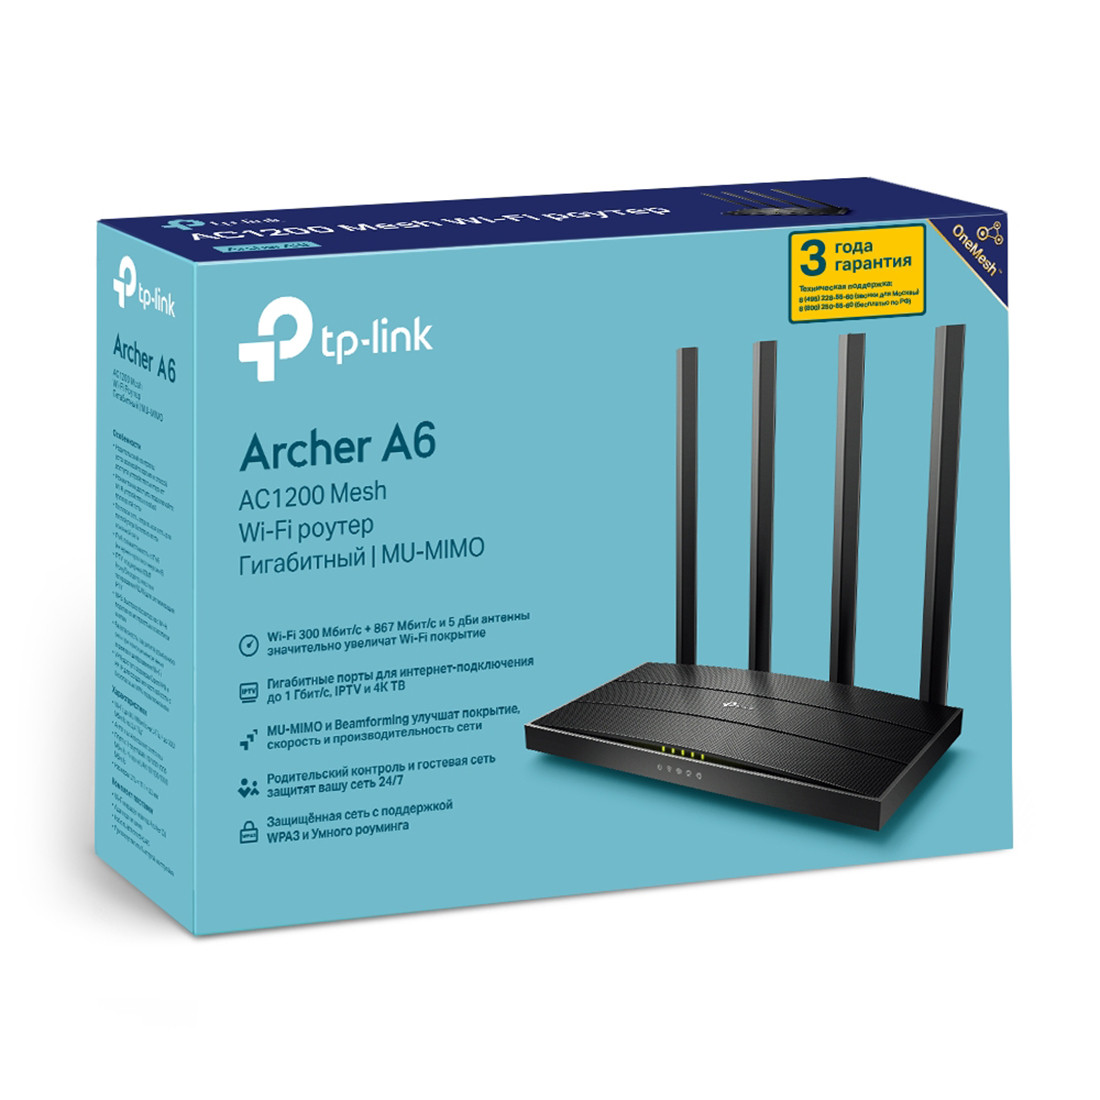 Маршрутизатор TP-Link Archer A6 (Маршрутизаторы) - фото 3 - id-p115007606